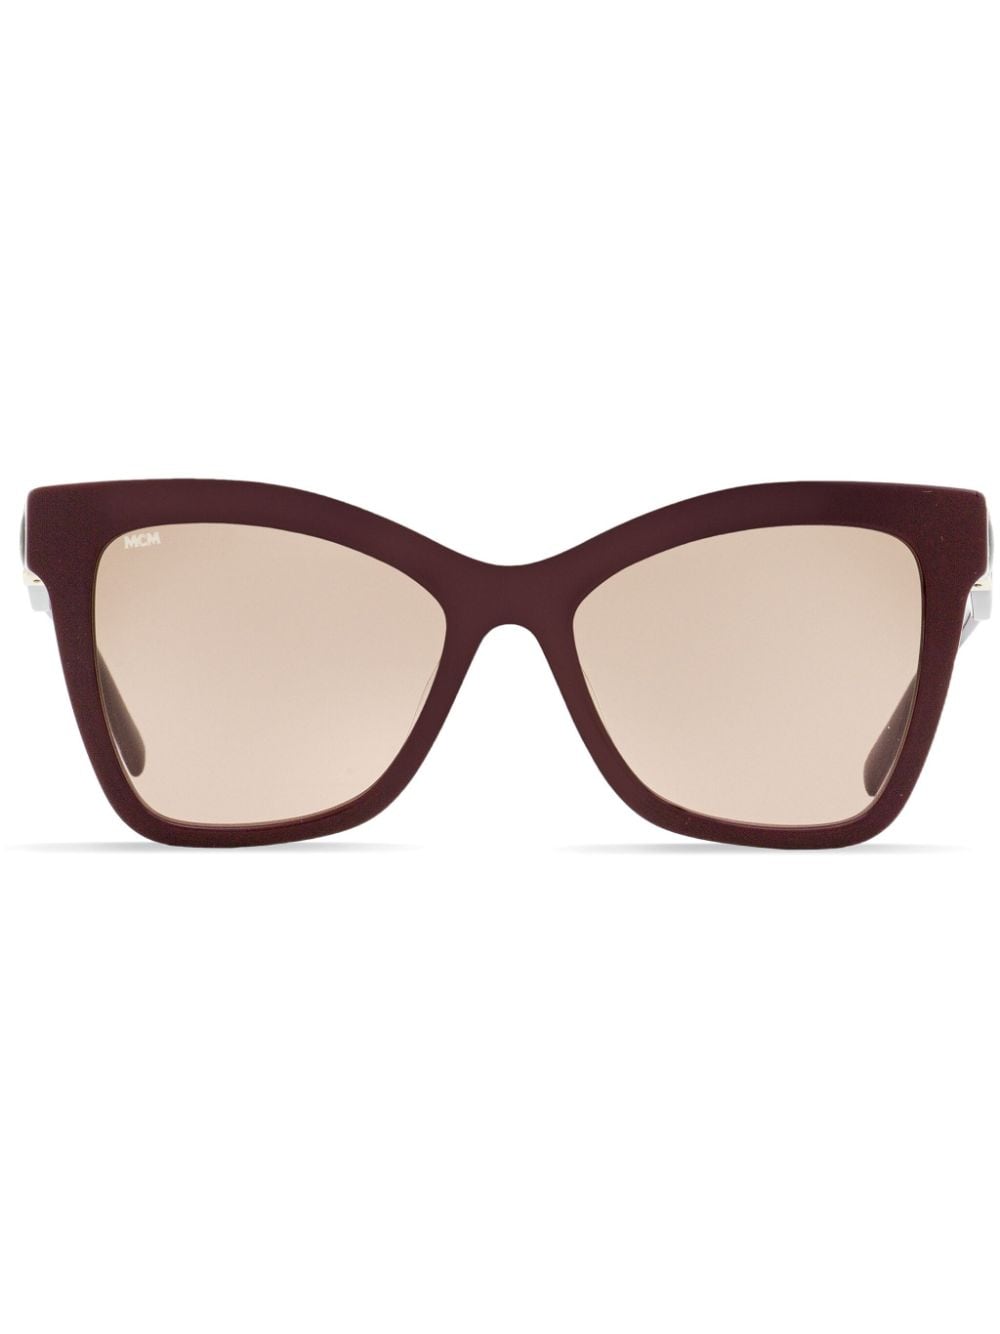 MCM 712S butterfly-frame tinted sunglasses - Red von MCM